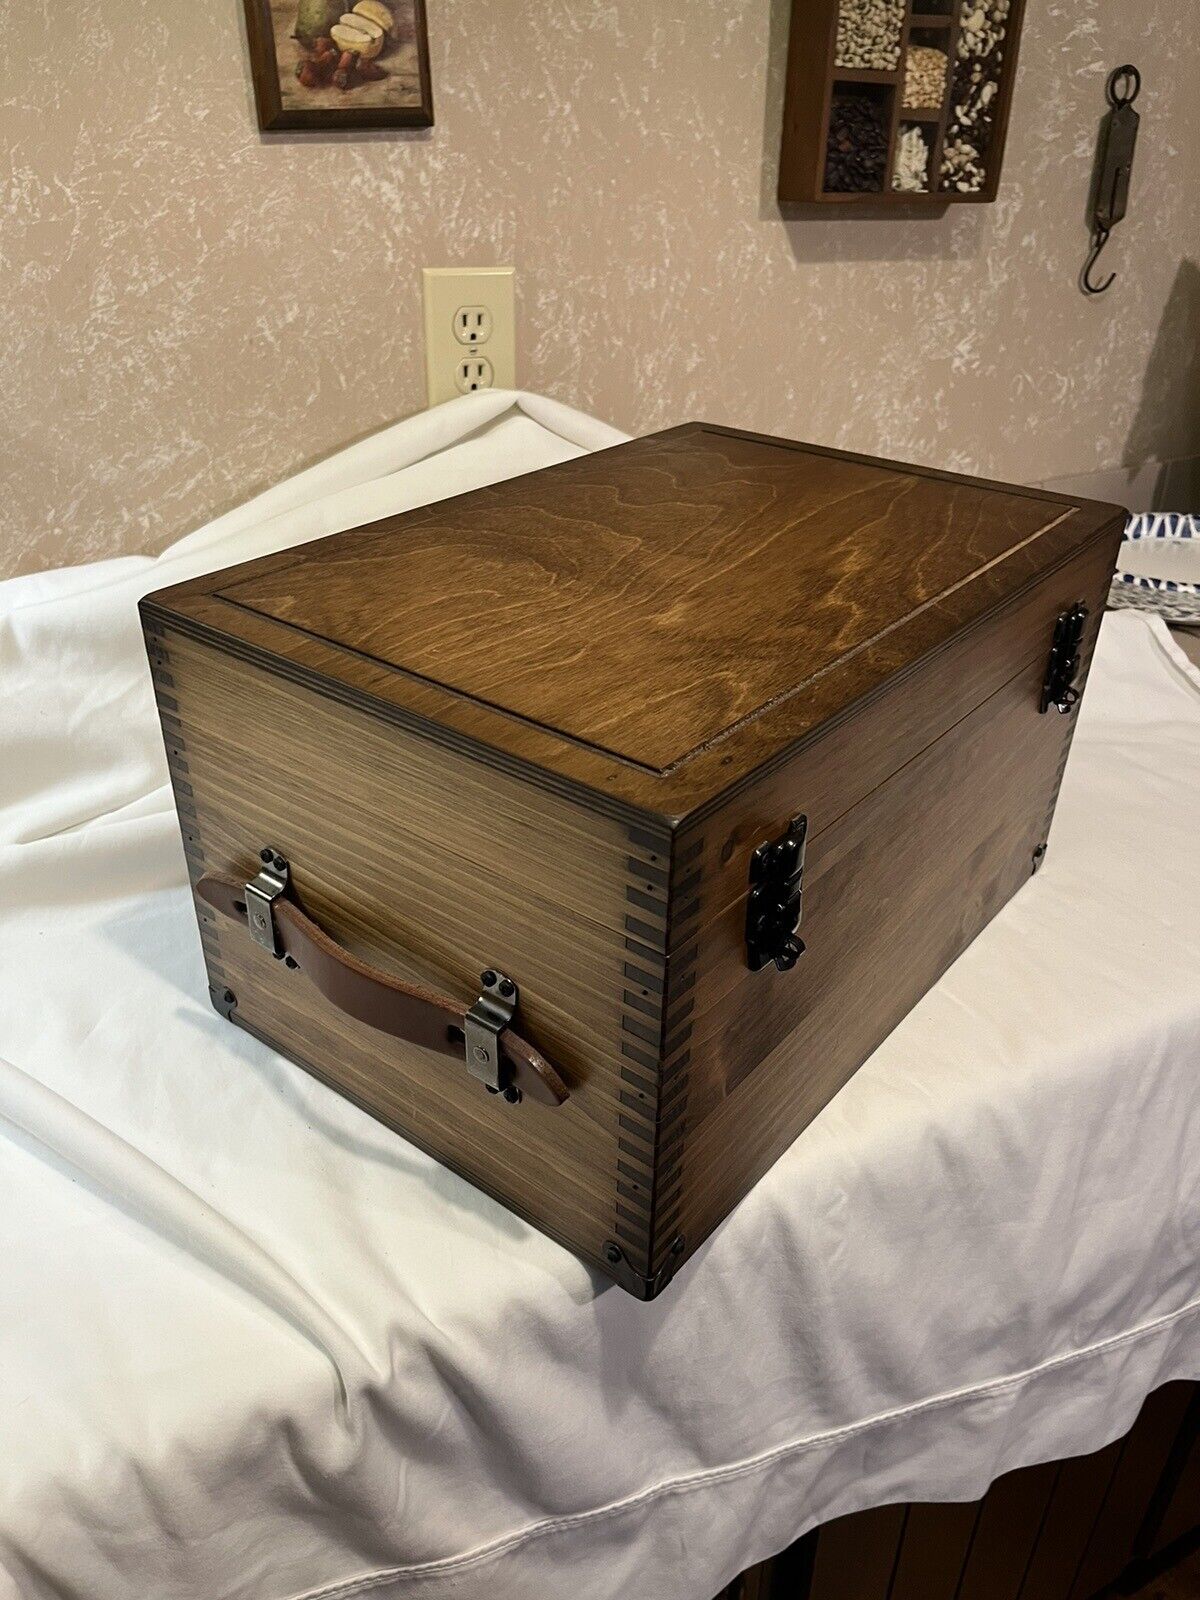 Solid Wood Jewelry, Keepsake or Stash Box by RELIC WOOD Handcrafted in the USA